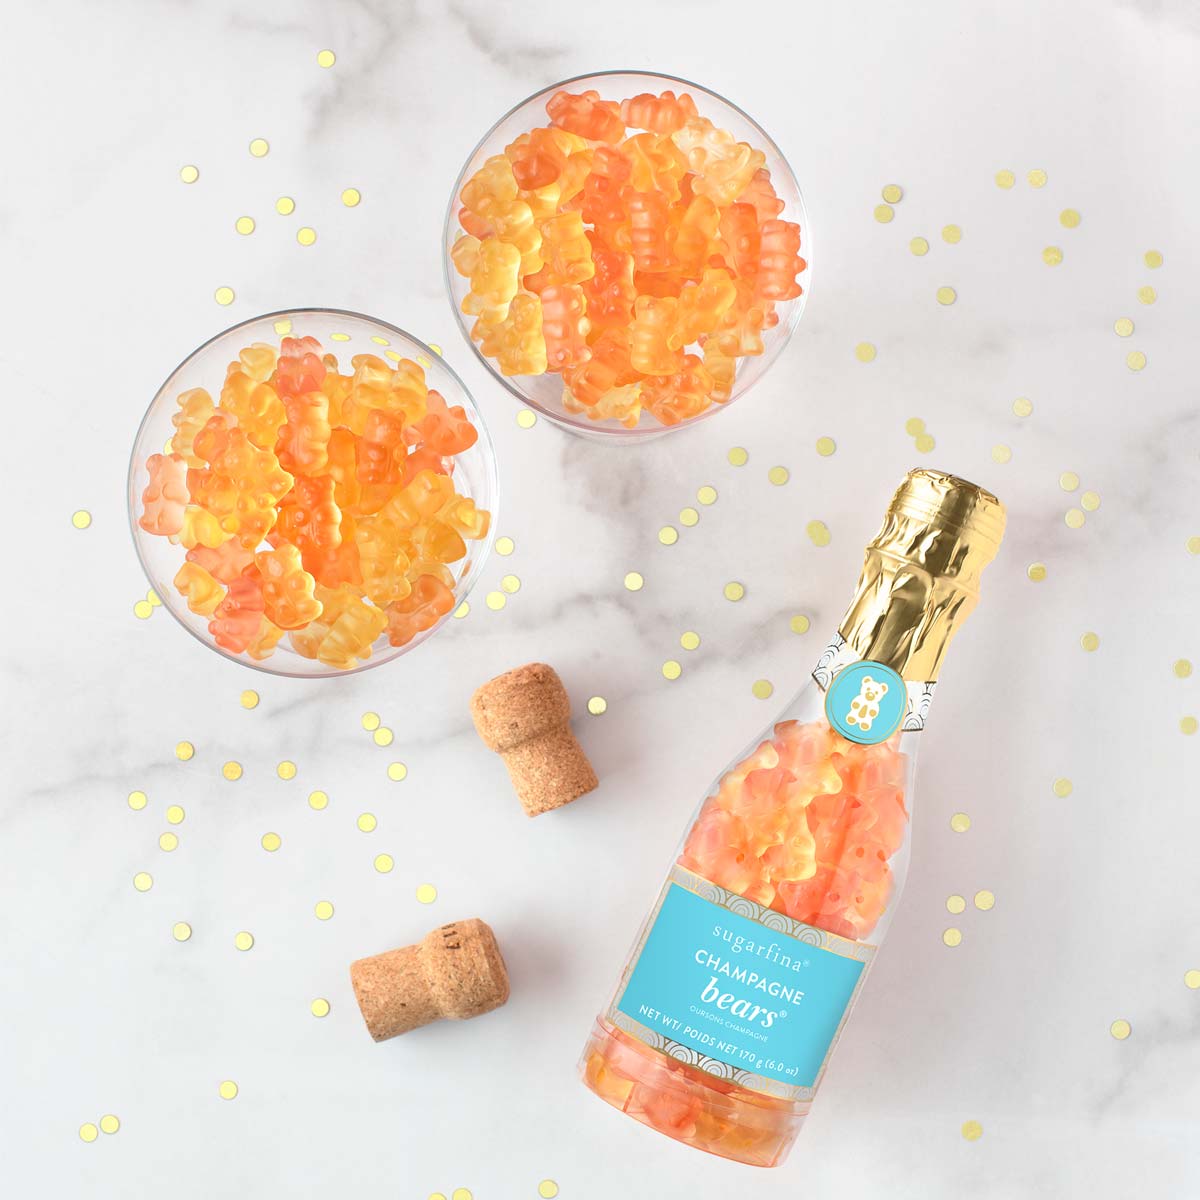 sugarfina champagne bears for any celebration such as birthday, wedding, graduation and more.